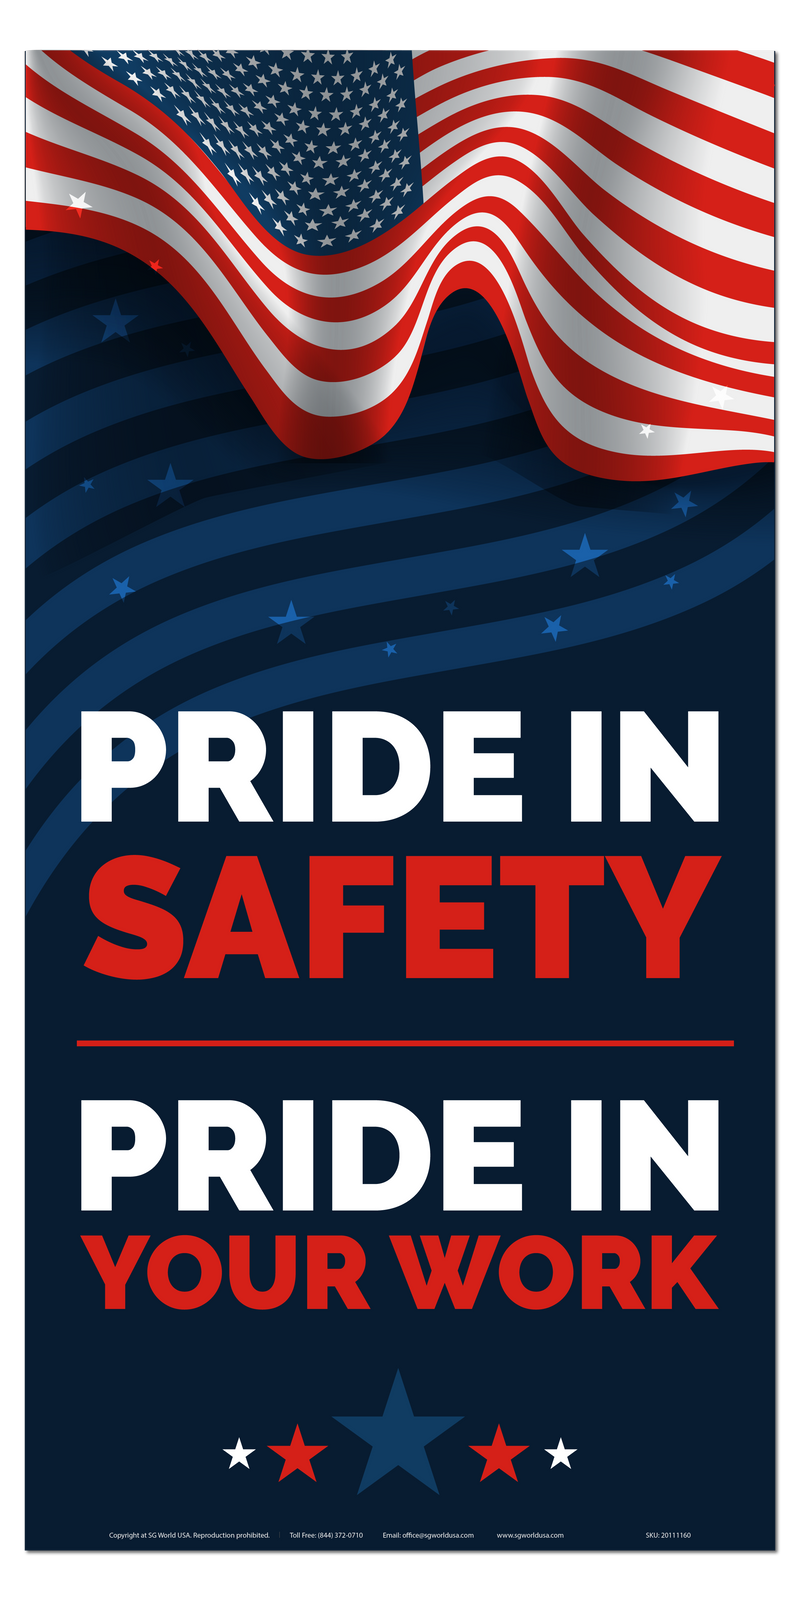 American Pride in Safety Banner for Workplace